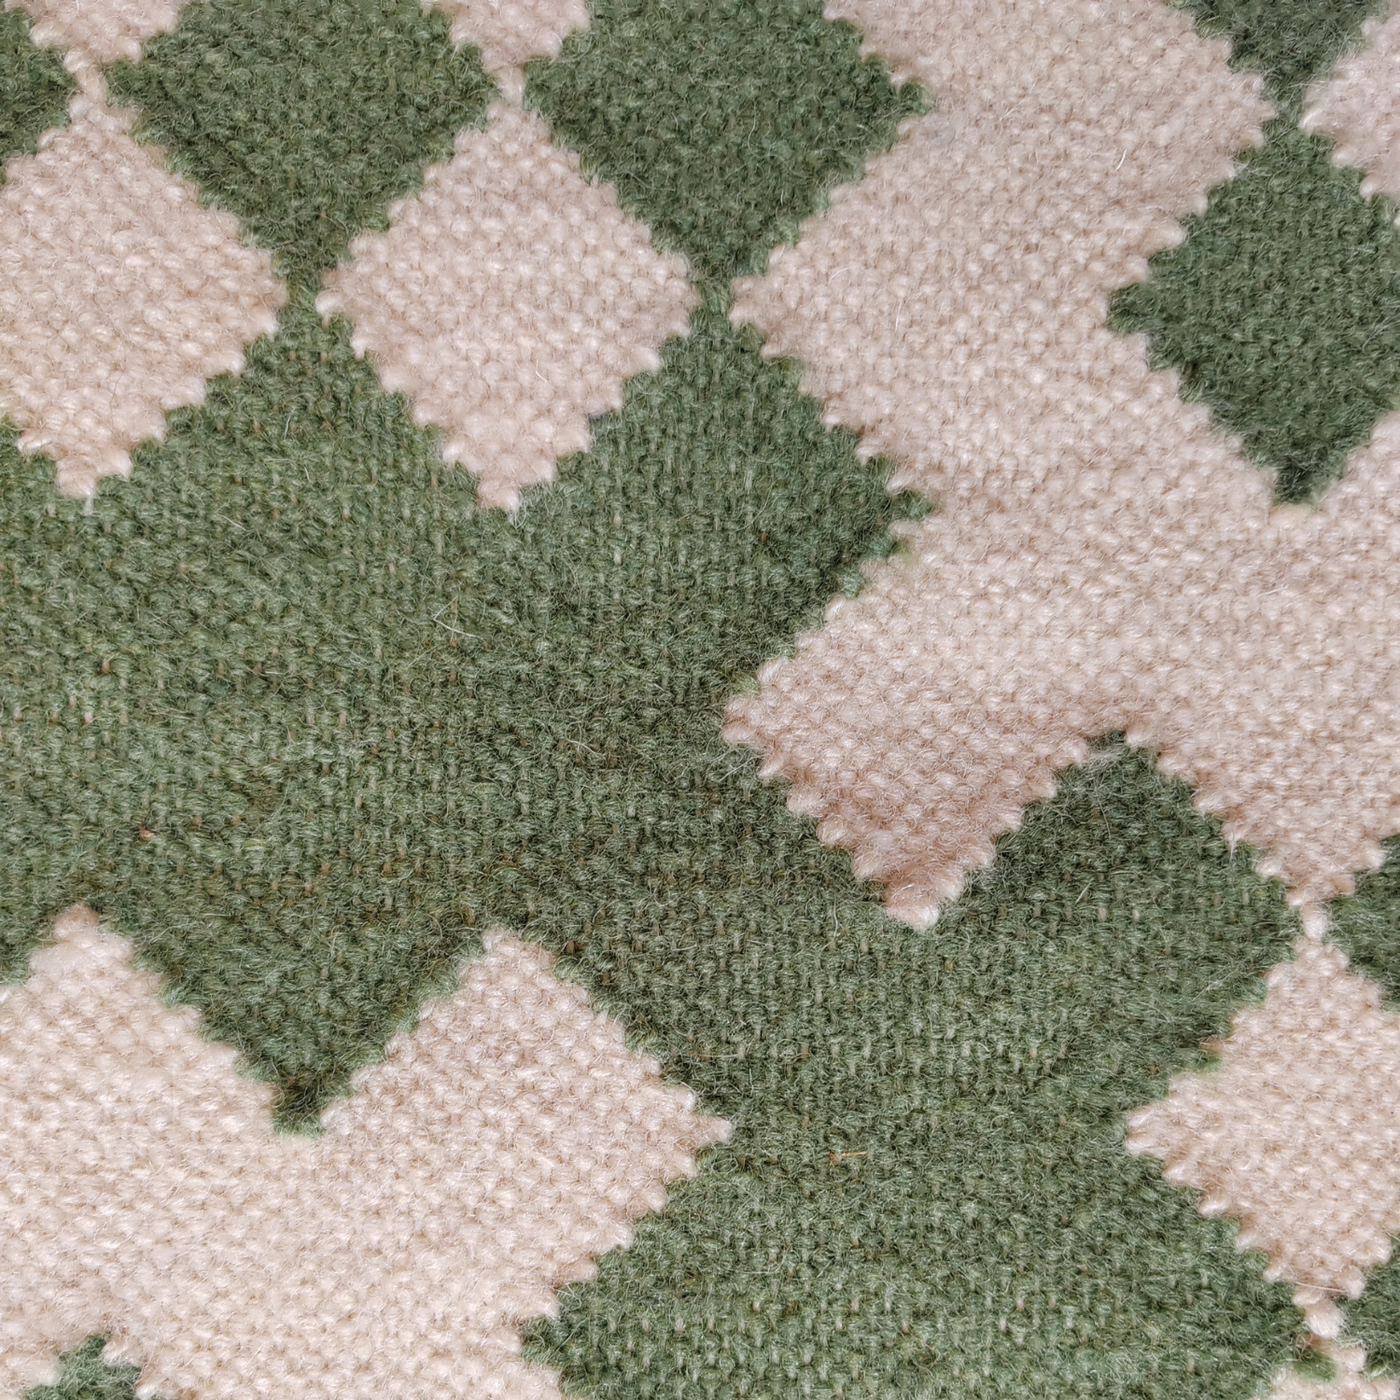 Tapestry Flatweave Rug - Green & Off-White - 1.2 x 1.8m